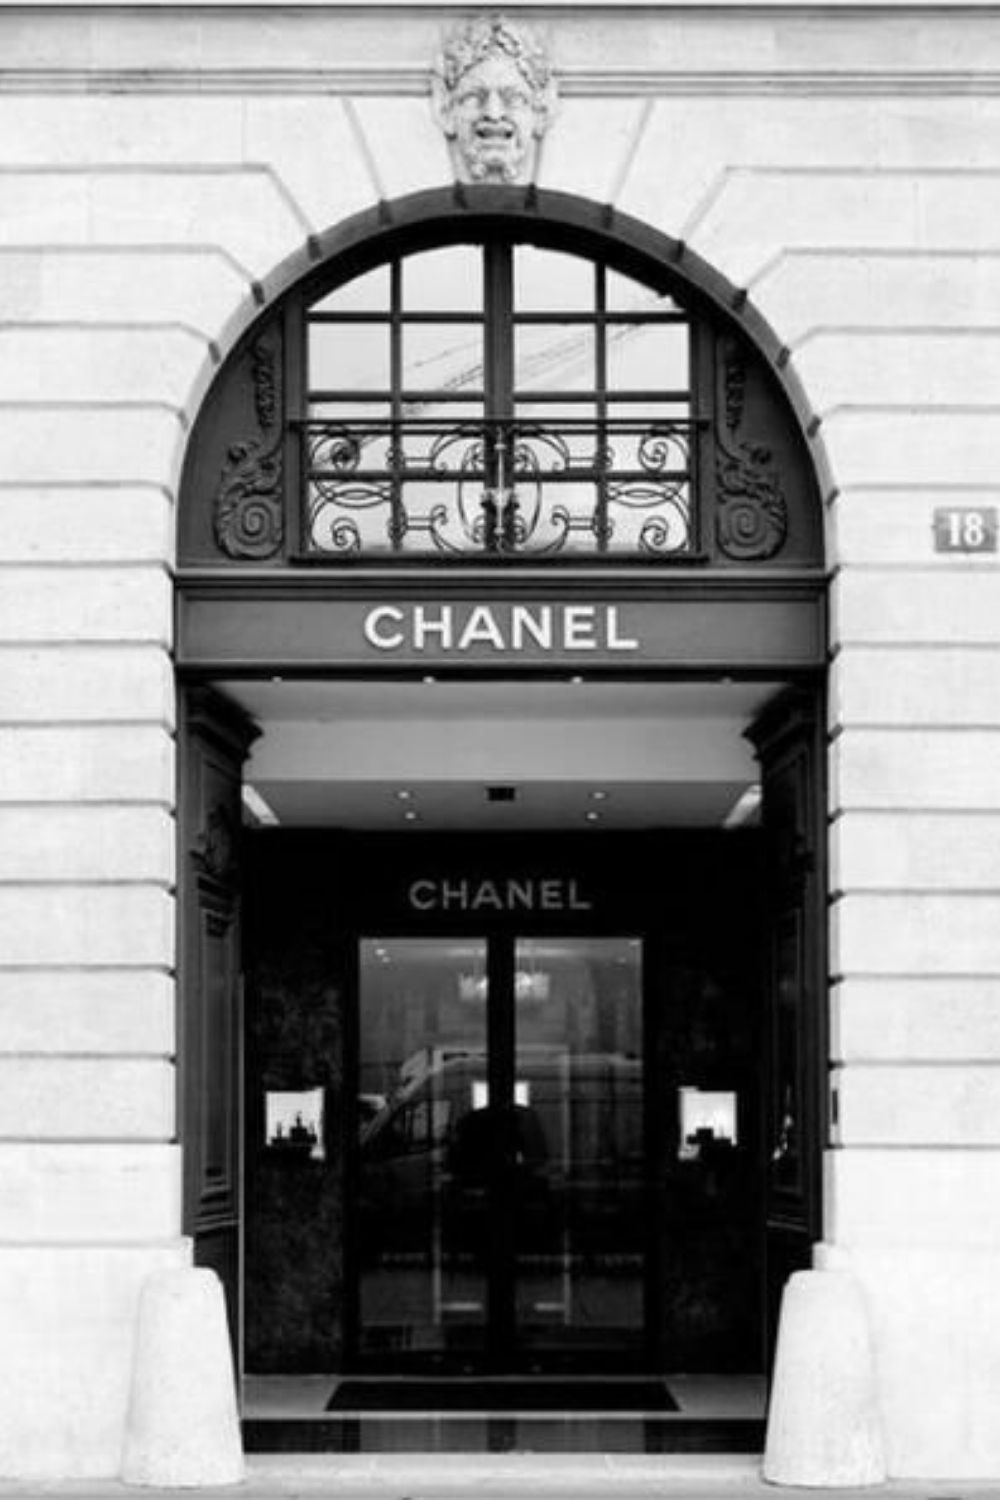 Chanel's black and white entrance to their store - Chanel